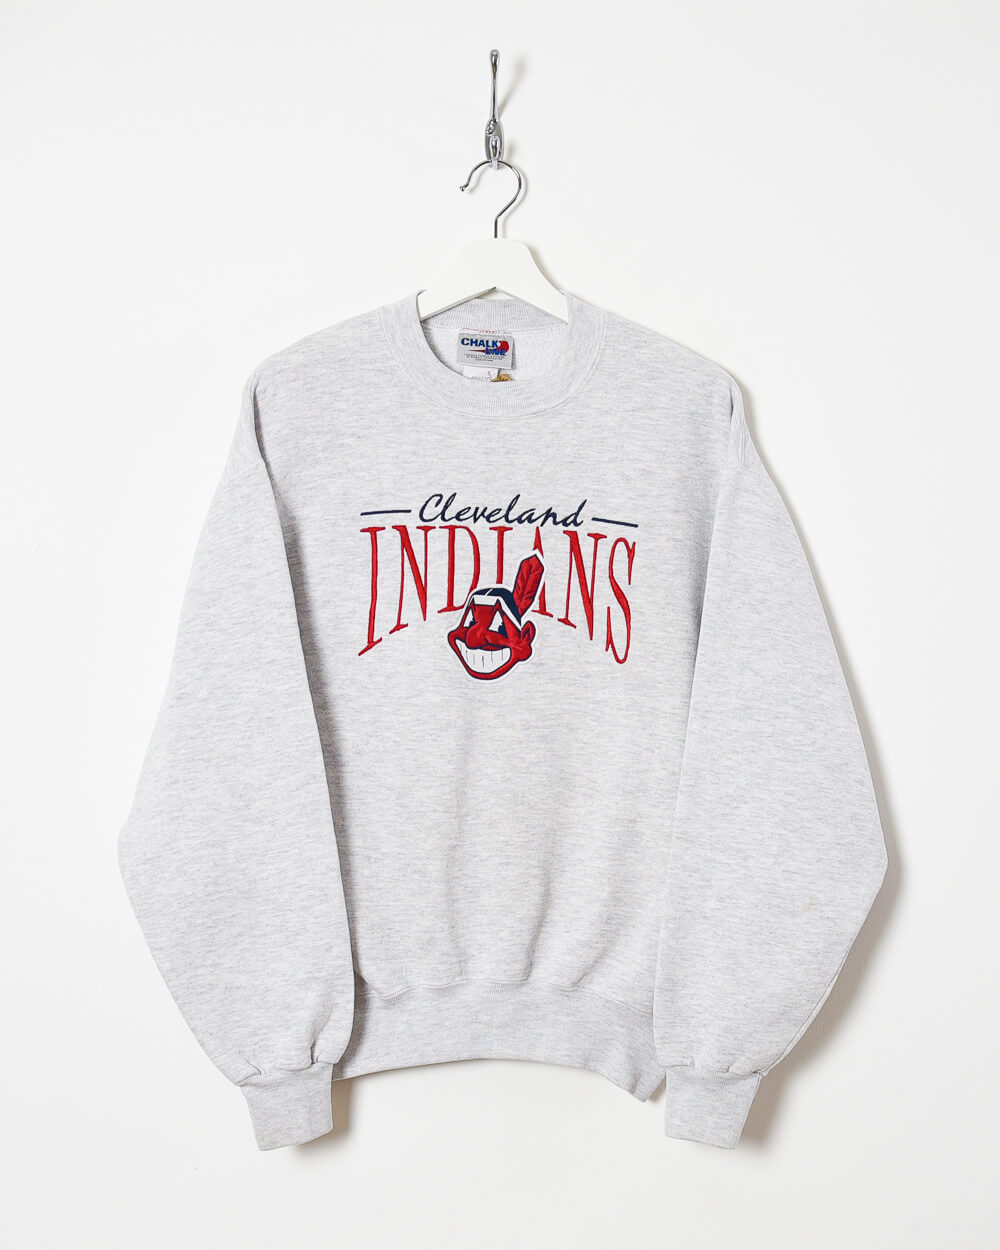 Chalk Line Cleveland Indians Sweatshirt - Small - Domno Vintage 90s, 80s, 00s Retro and Vintage Clothing 